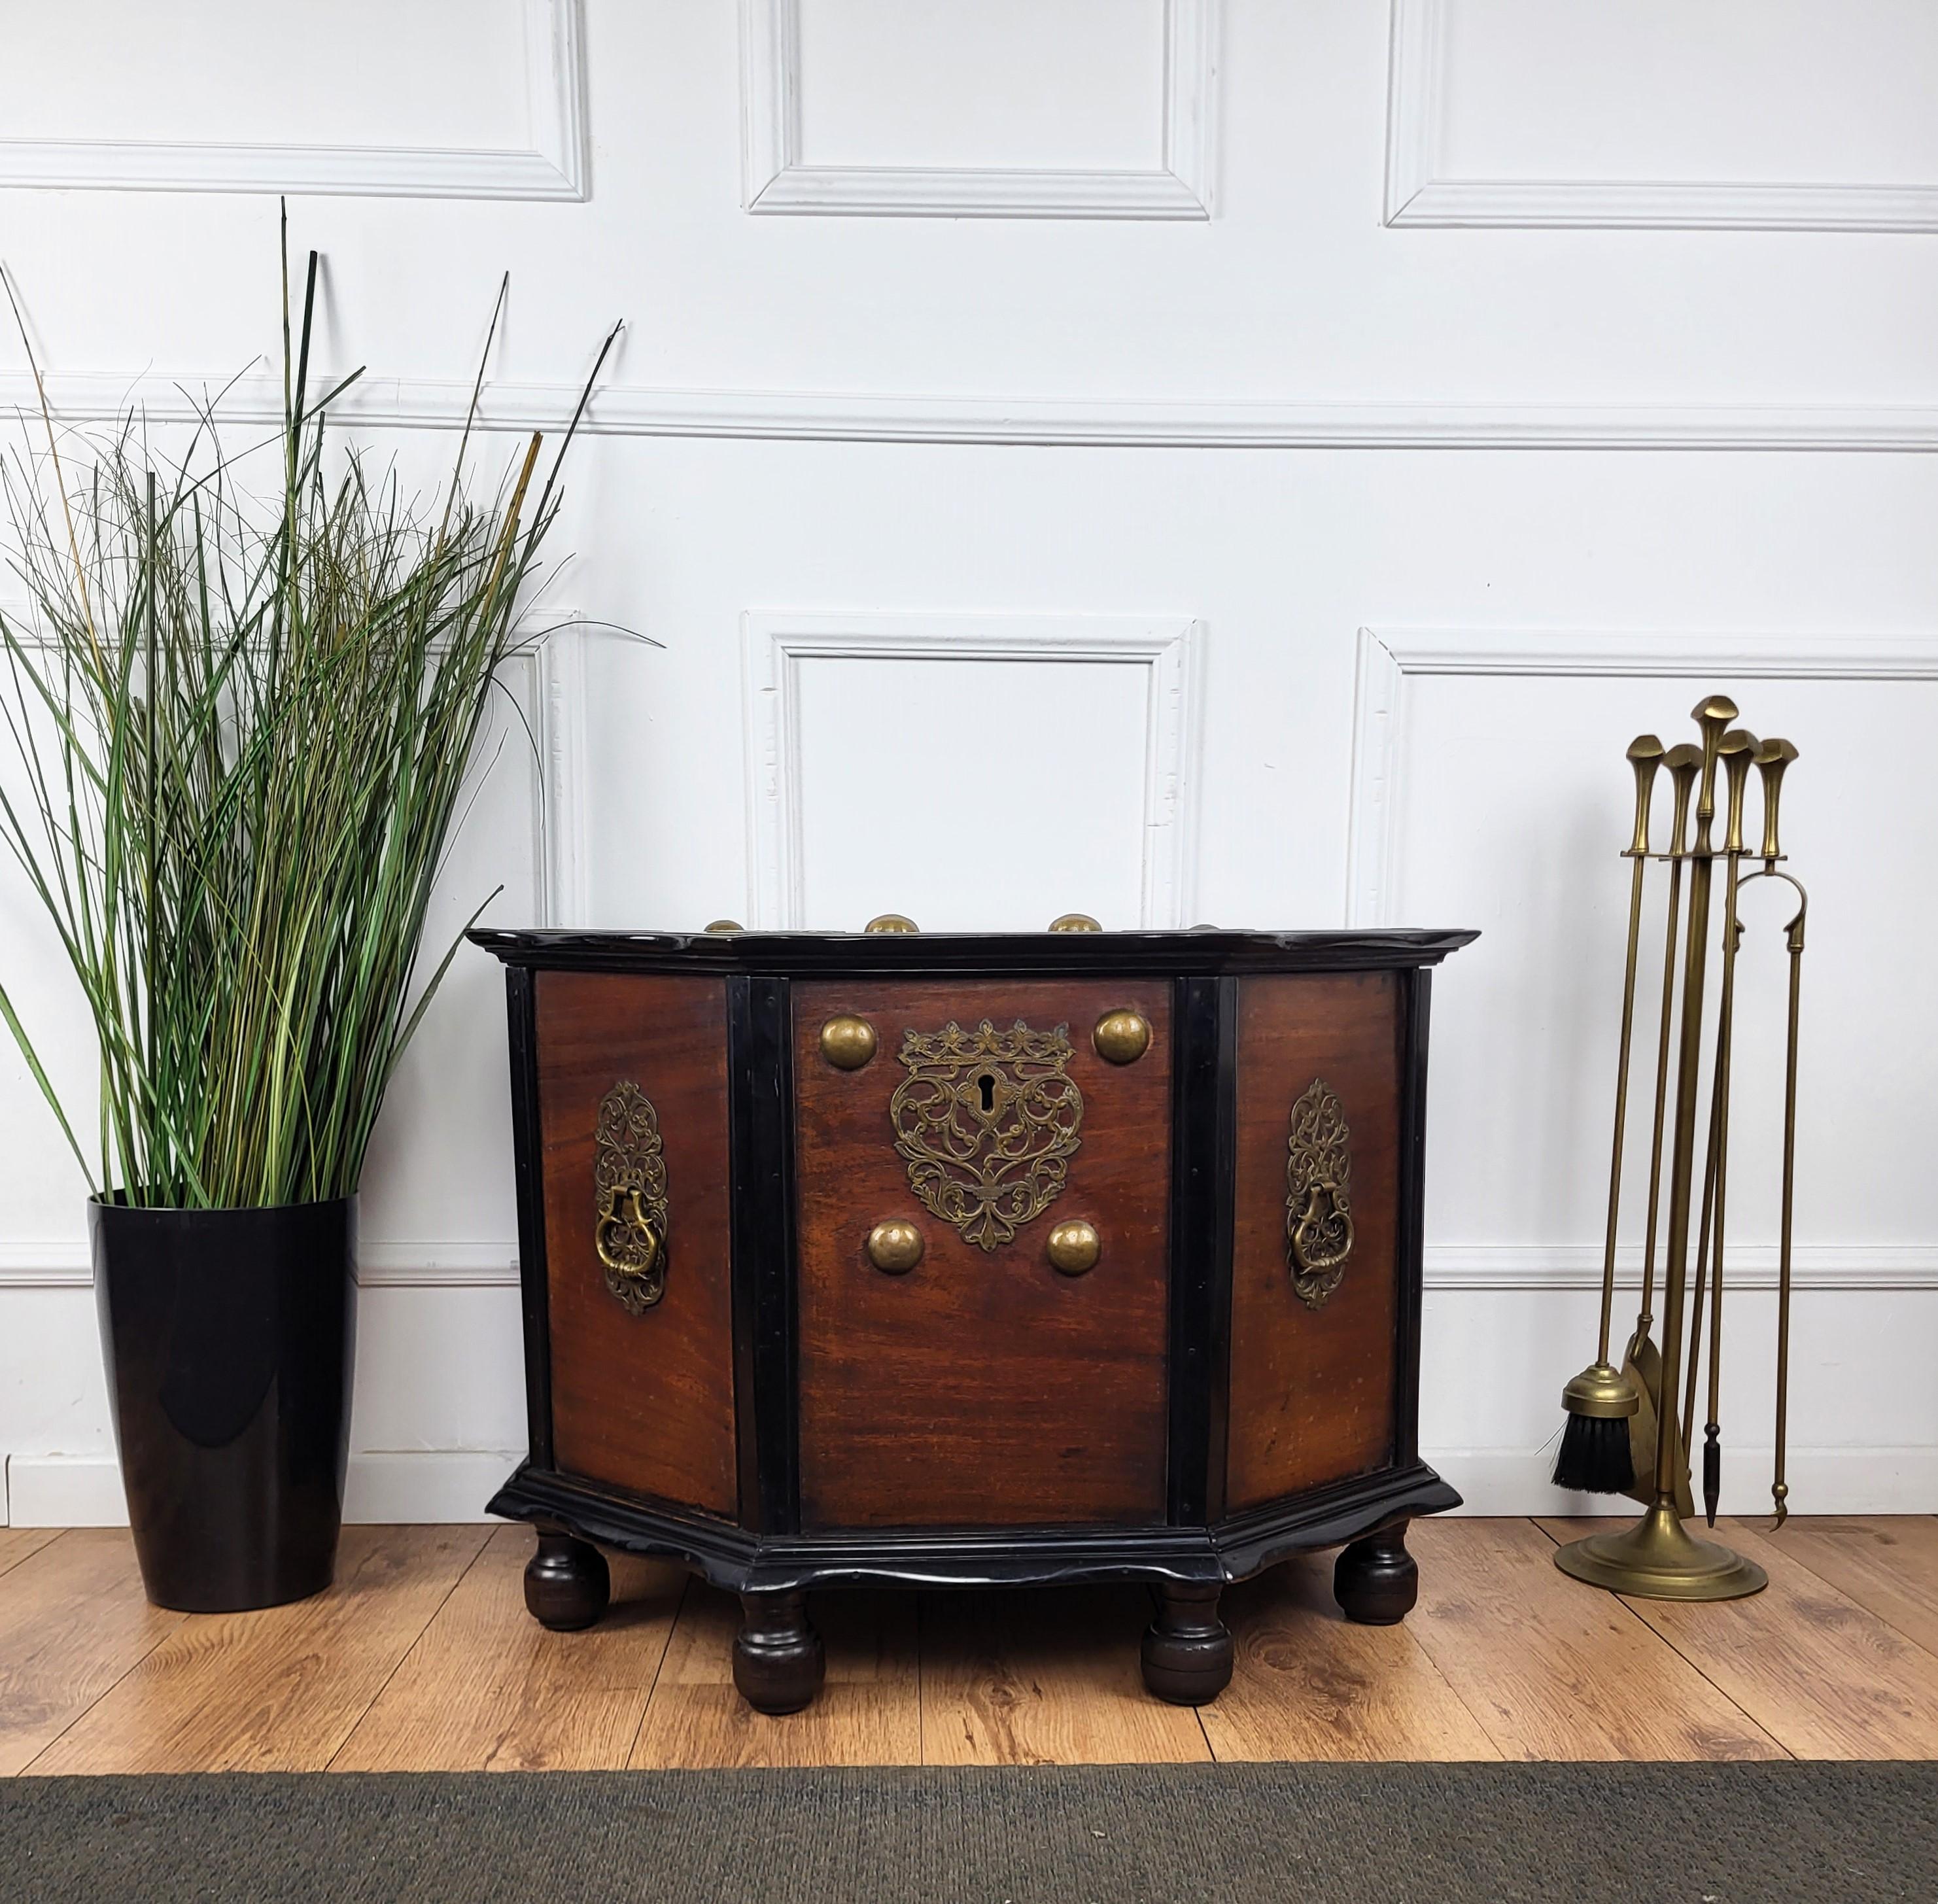 Beautiful Italian antique chest, trunk in great solid wood with blackened carved edges and frames, great original brass handles, escutcheons and decors on all sides, completed with the bun feet. This very decorative piece can be used in any room for